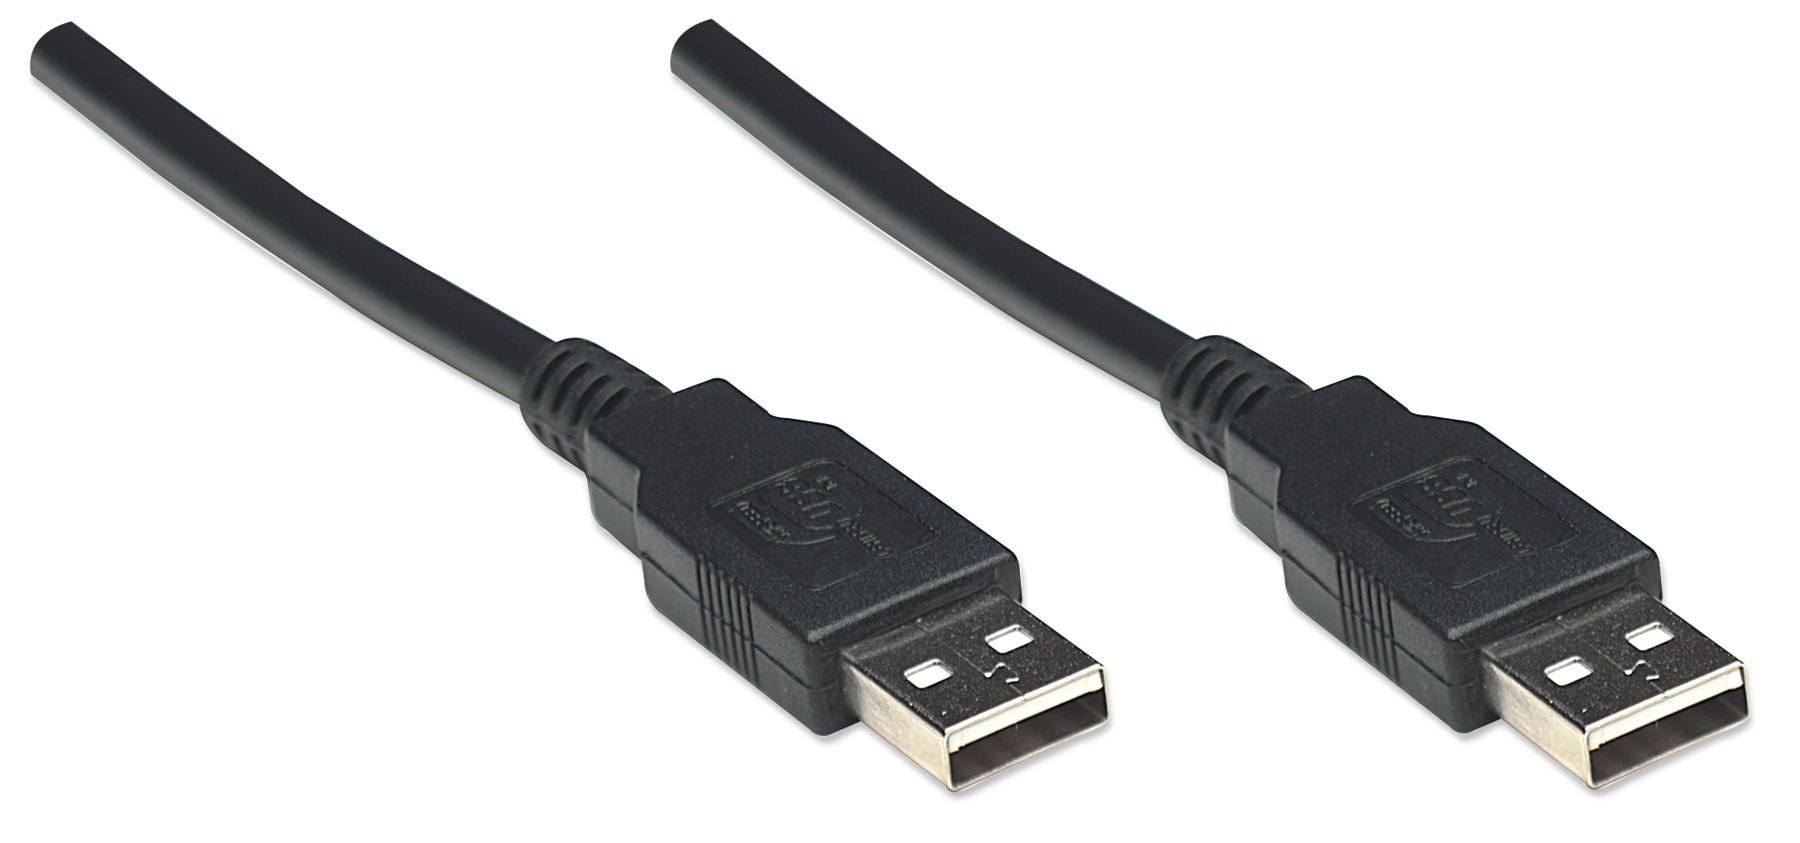 Manhattan USB-A to USB-A Cable, 1.8m, Male to Male, 480 Mbps (USB 2.0), Black, Polybag